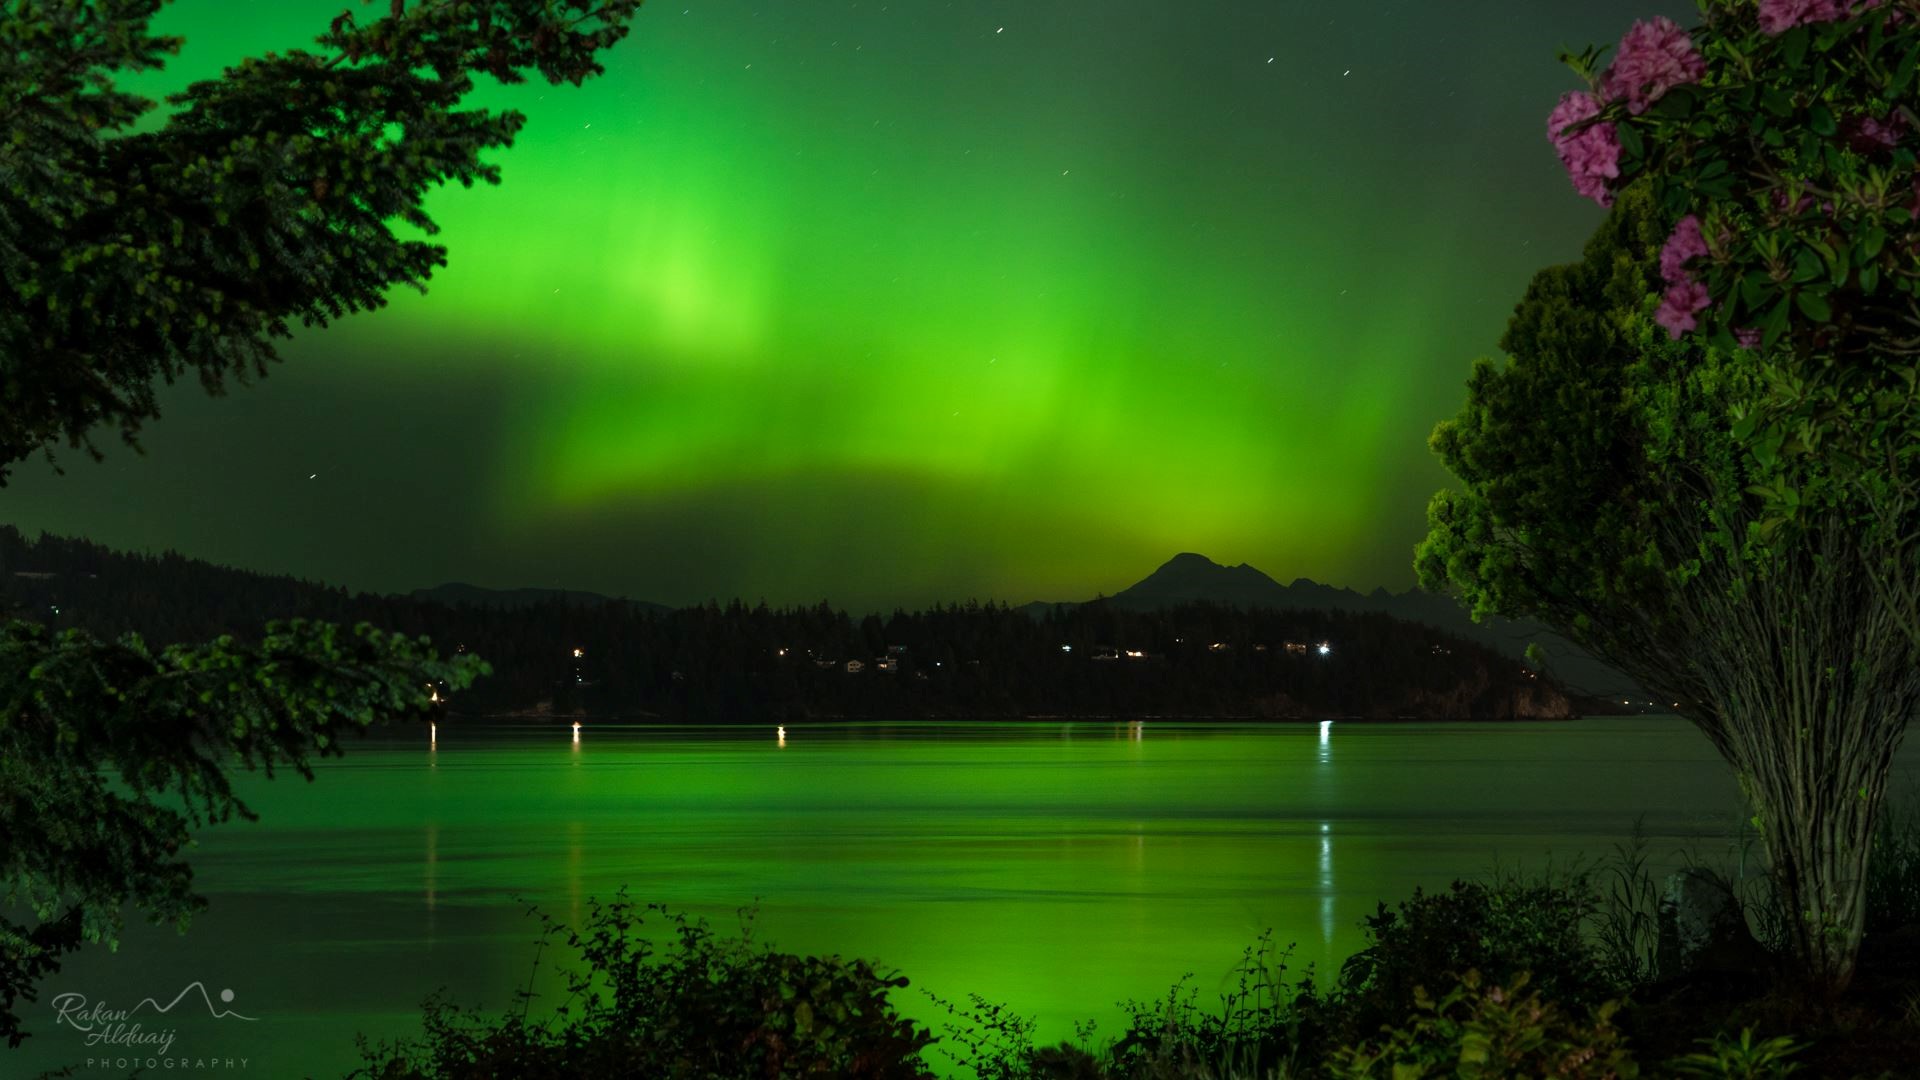 The Northern Lights may be visible in western Washington this weekend. We will be under what’s known as a Geomagnetic Storm Watch Friday through Sunday.